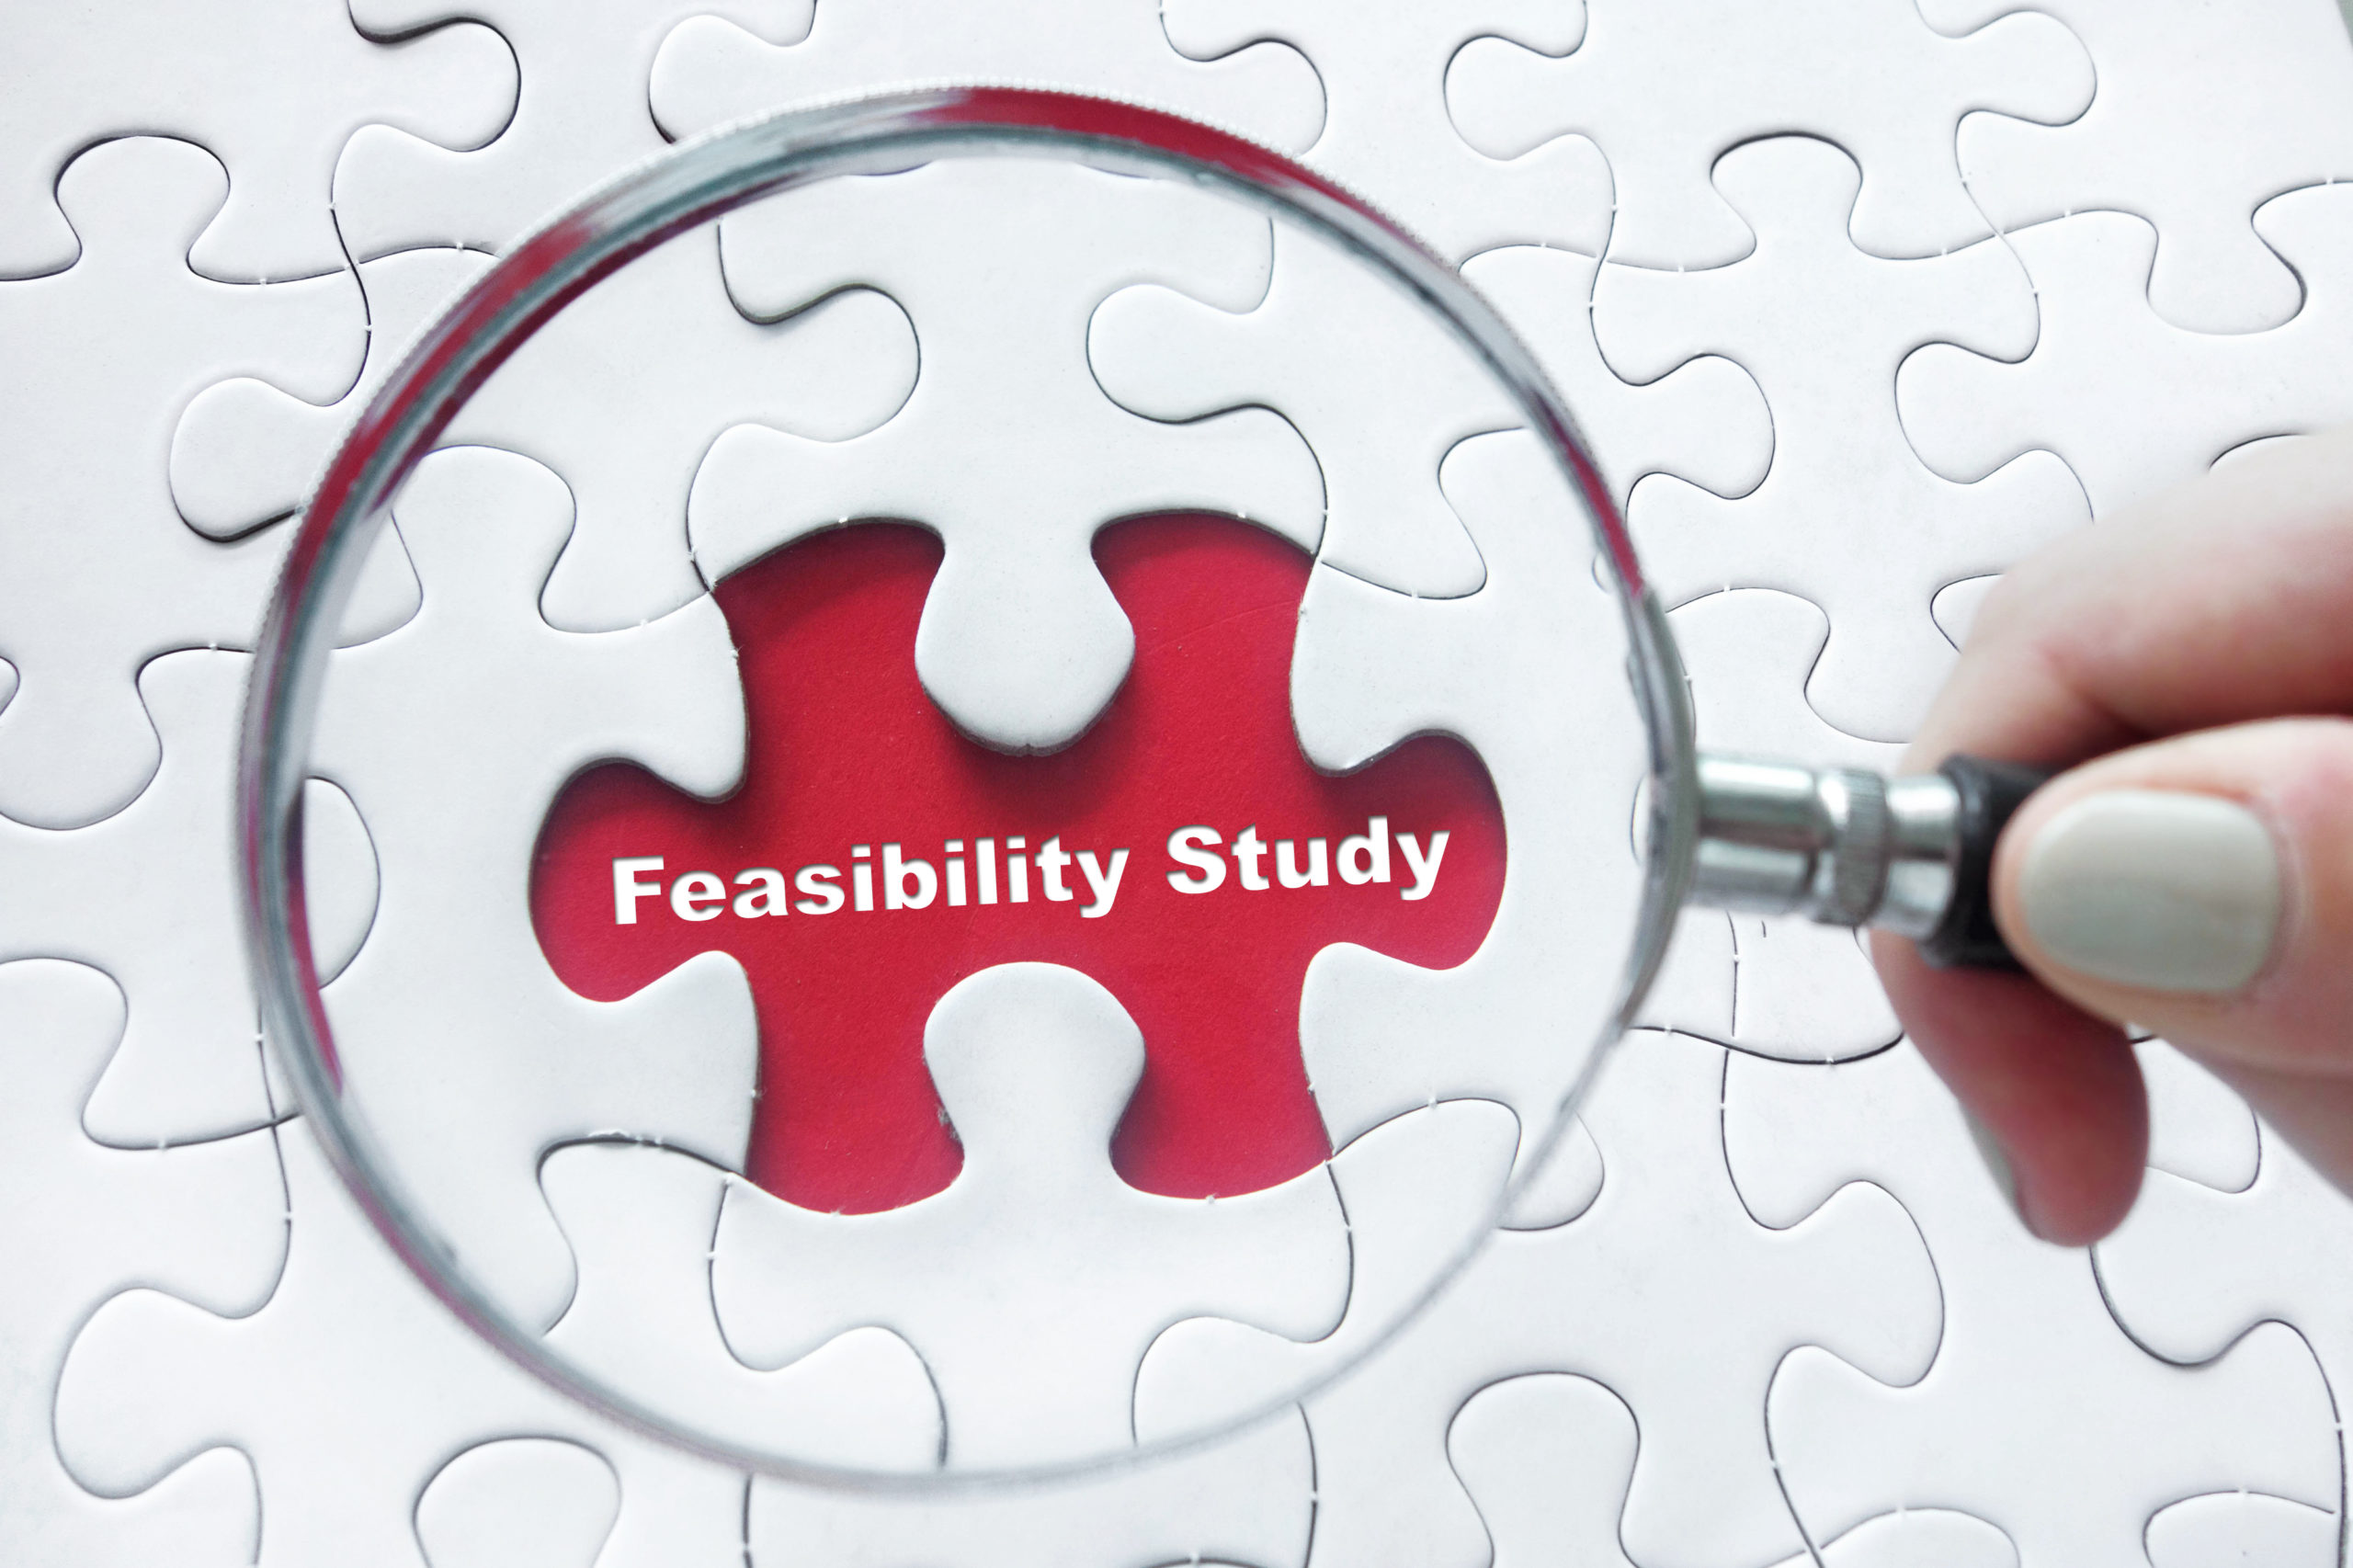 Feasibility Study Puzzle